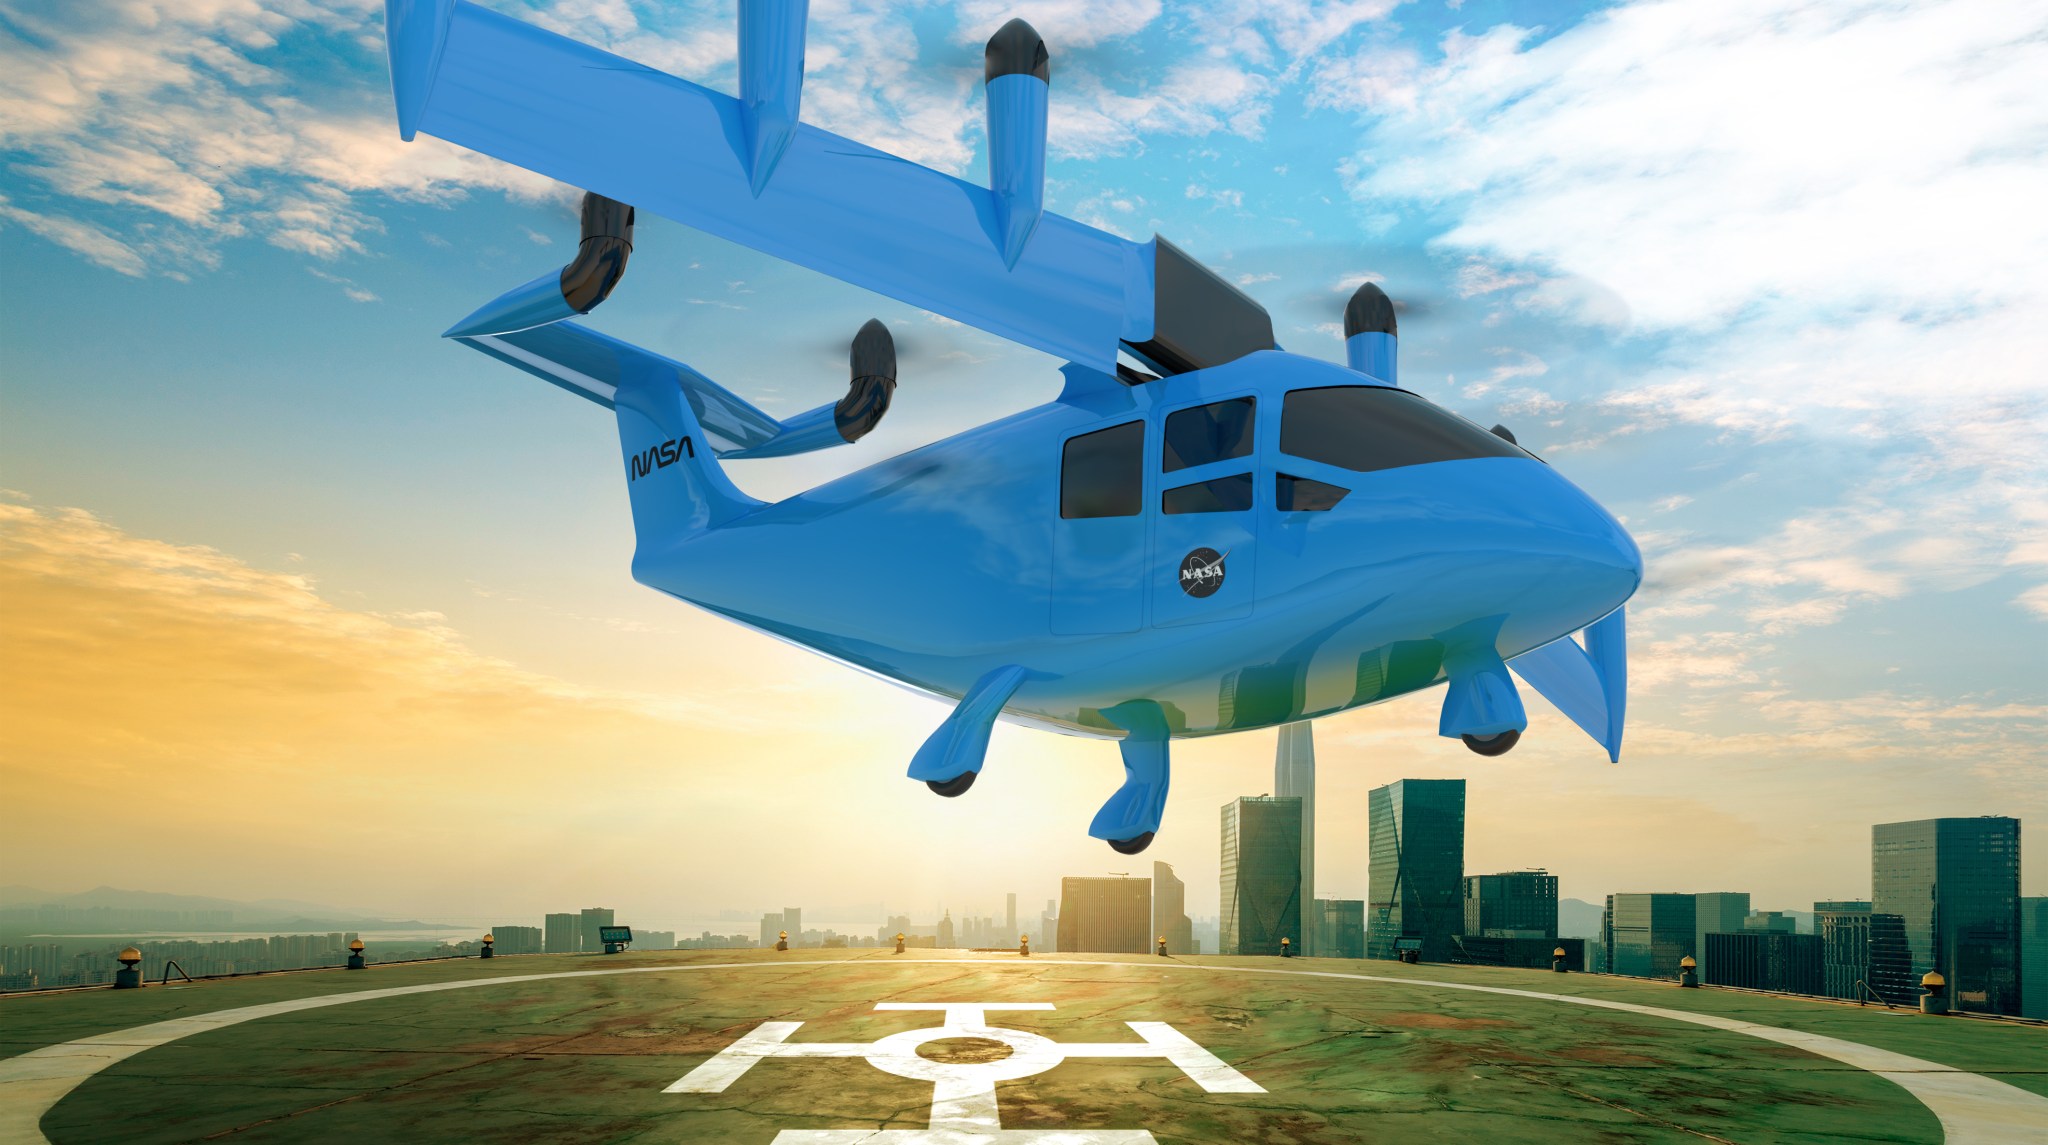 Artist illustration of an unmanned passenger aircraft preparing to land on the vertiport.